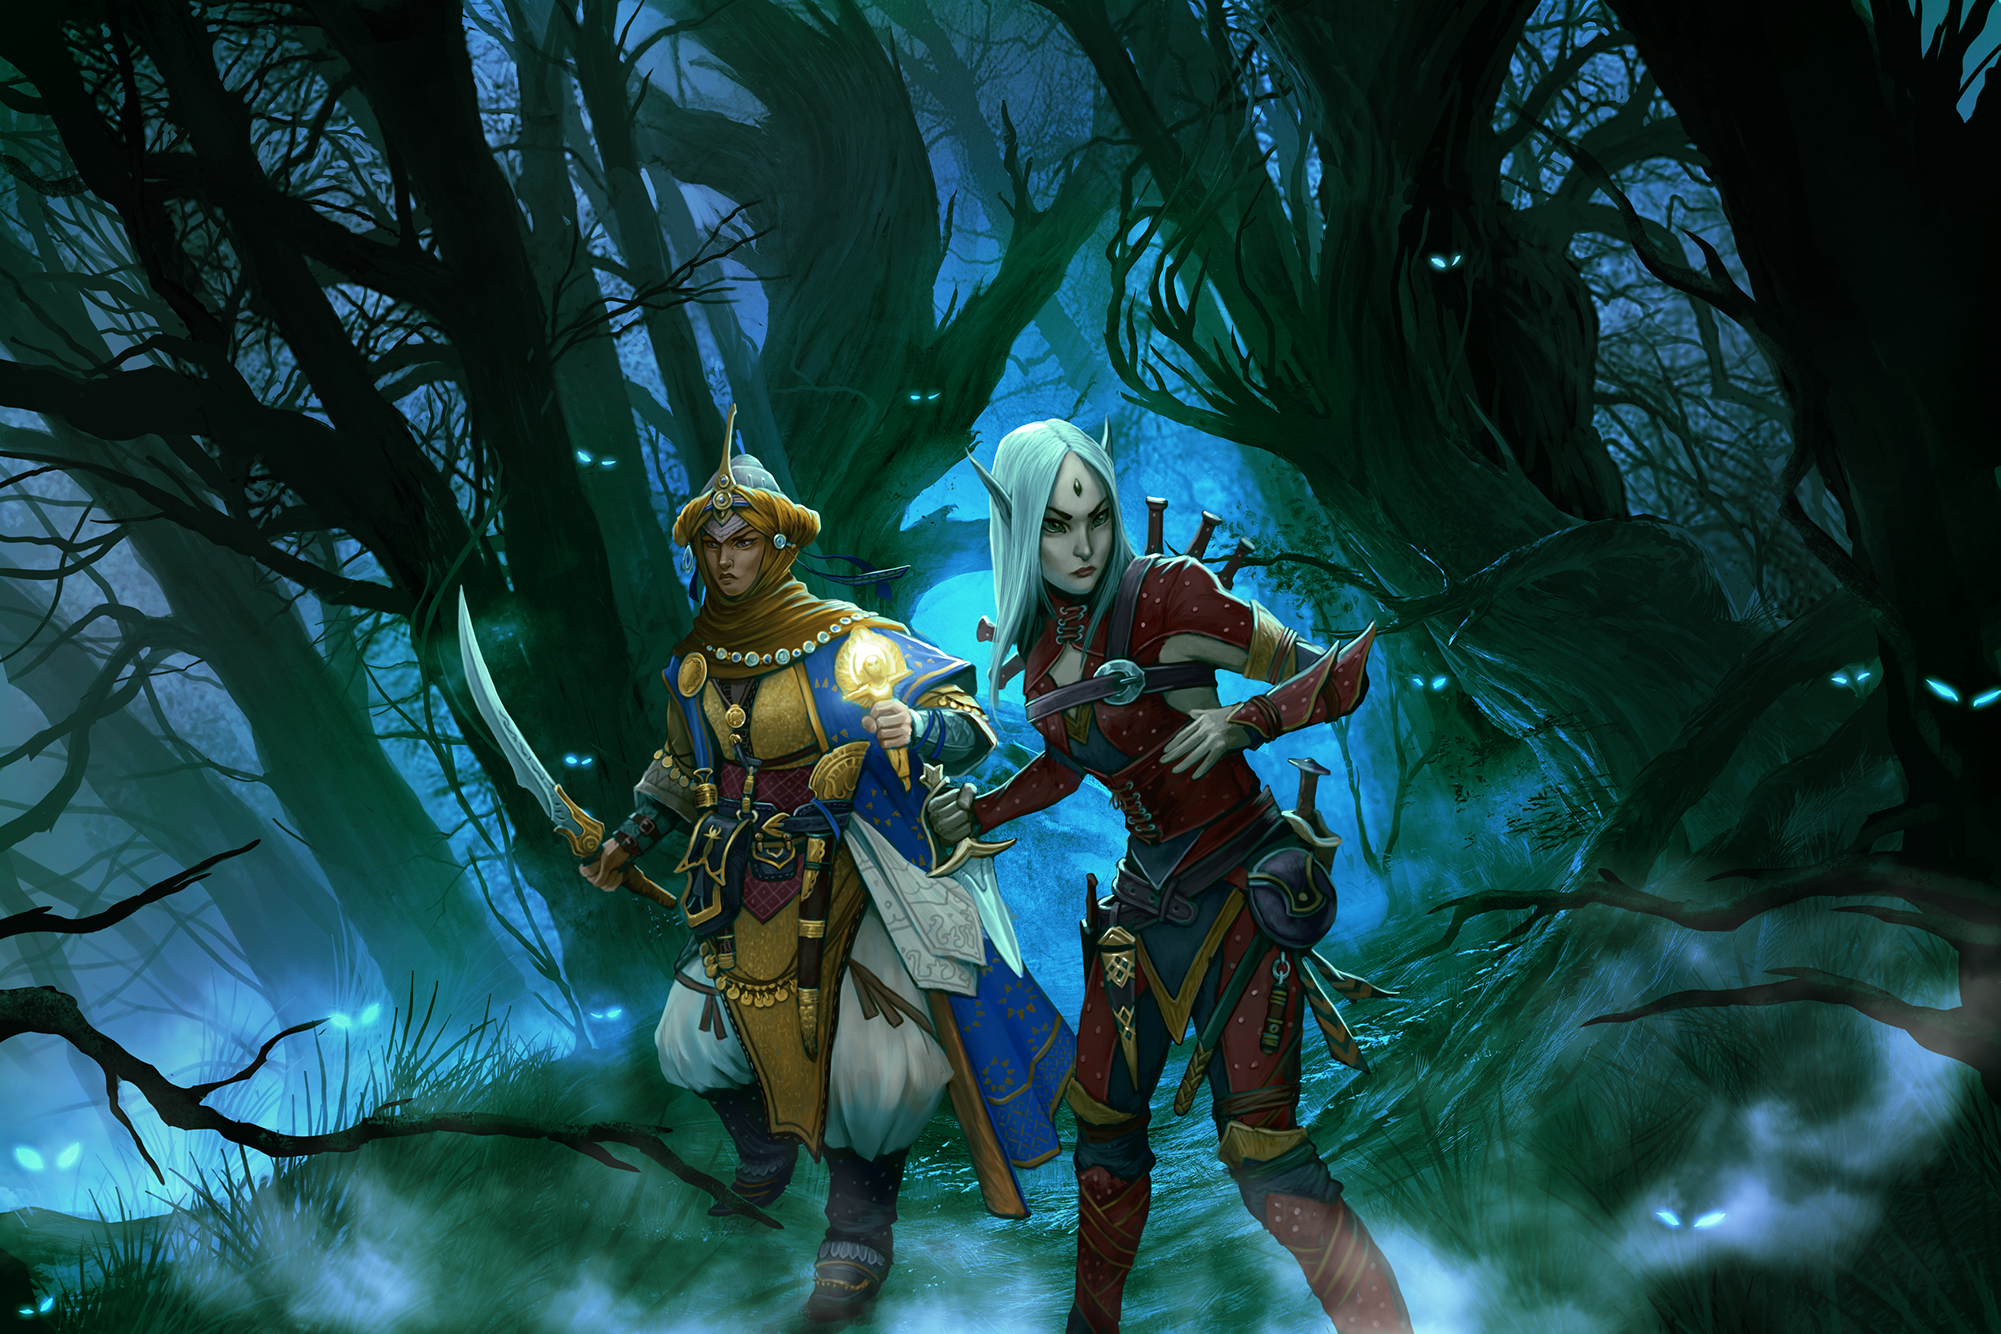 Kyra and Merisiel walk through a shadowy, fog-shrouded forest, weapons in hand. Several pairs of small glowing eyes peer at them from the darkness.